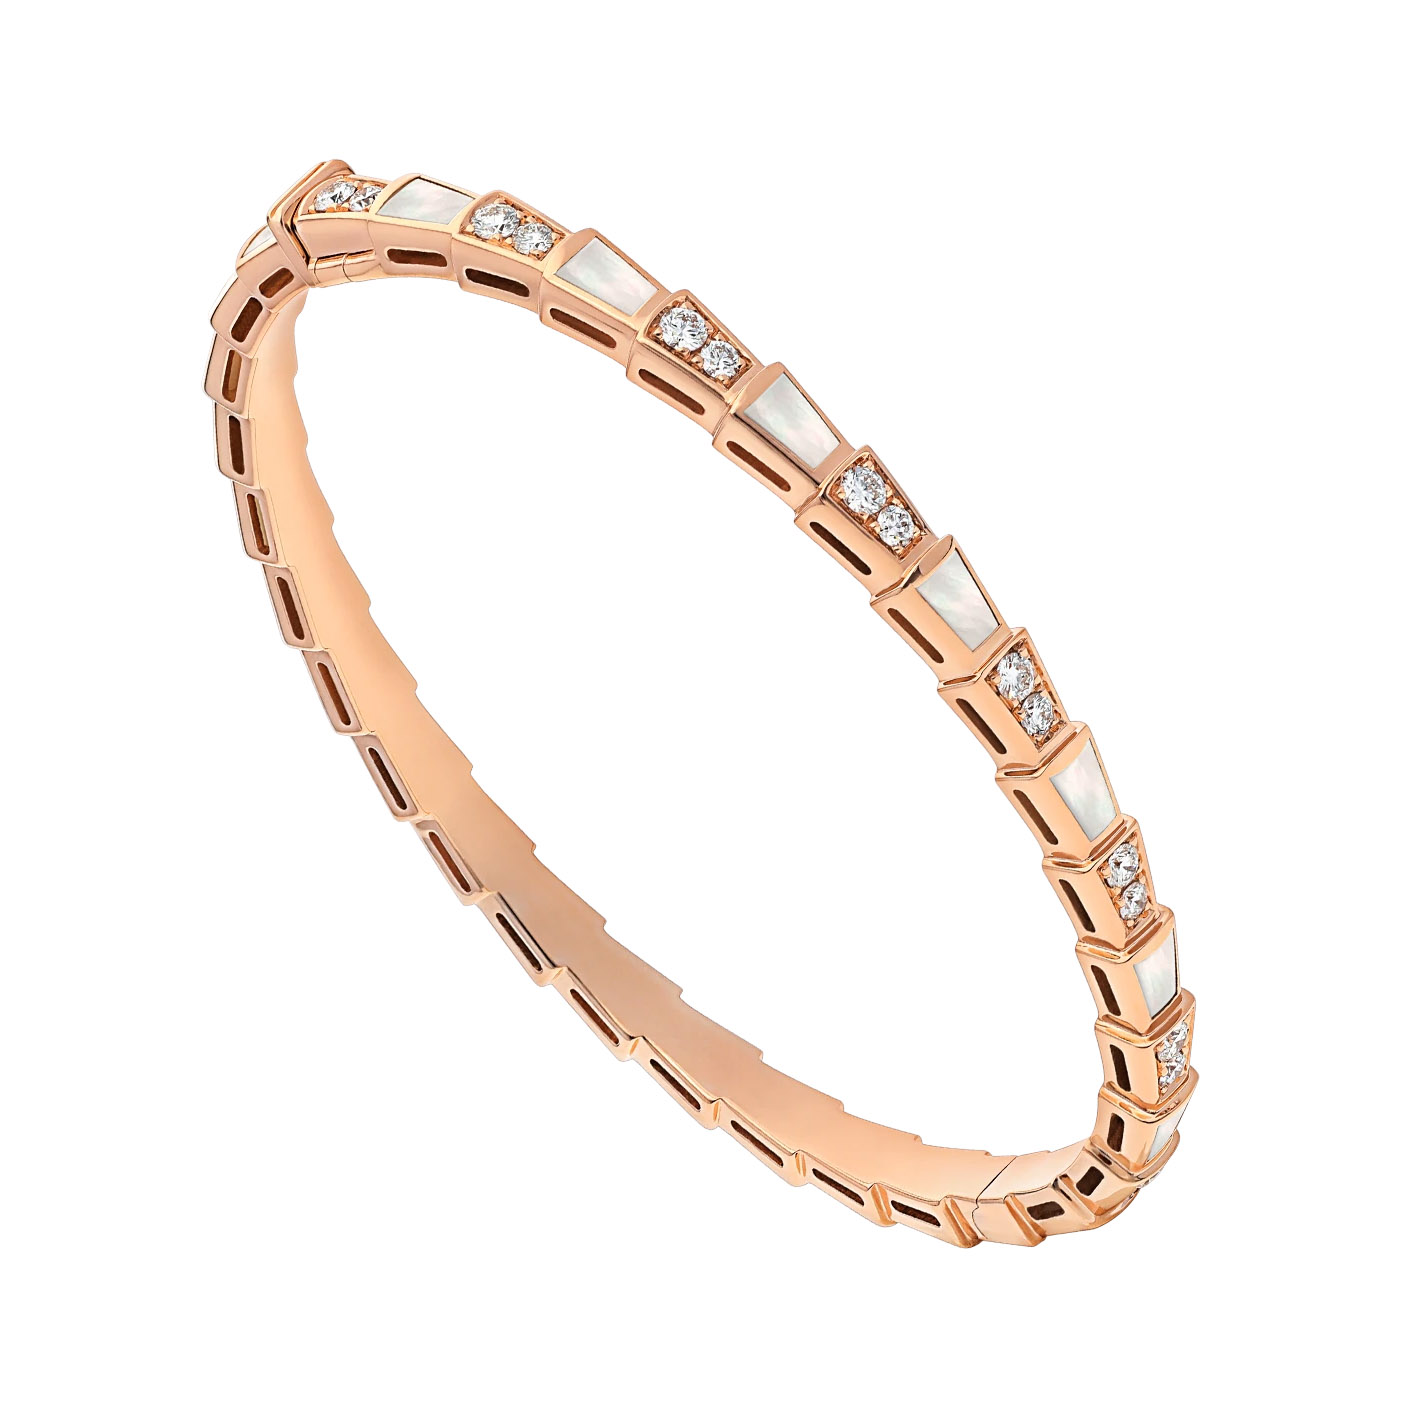 Wholesale OEM/ODM Jewelry Custom design 18K rose gold bracelet set with mother-of-pearl elements and pavé diamonds OEM Jewelry Factory